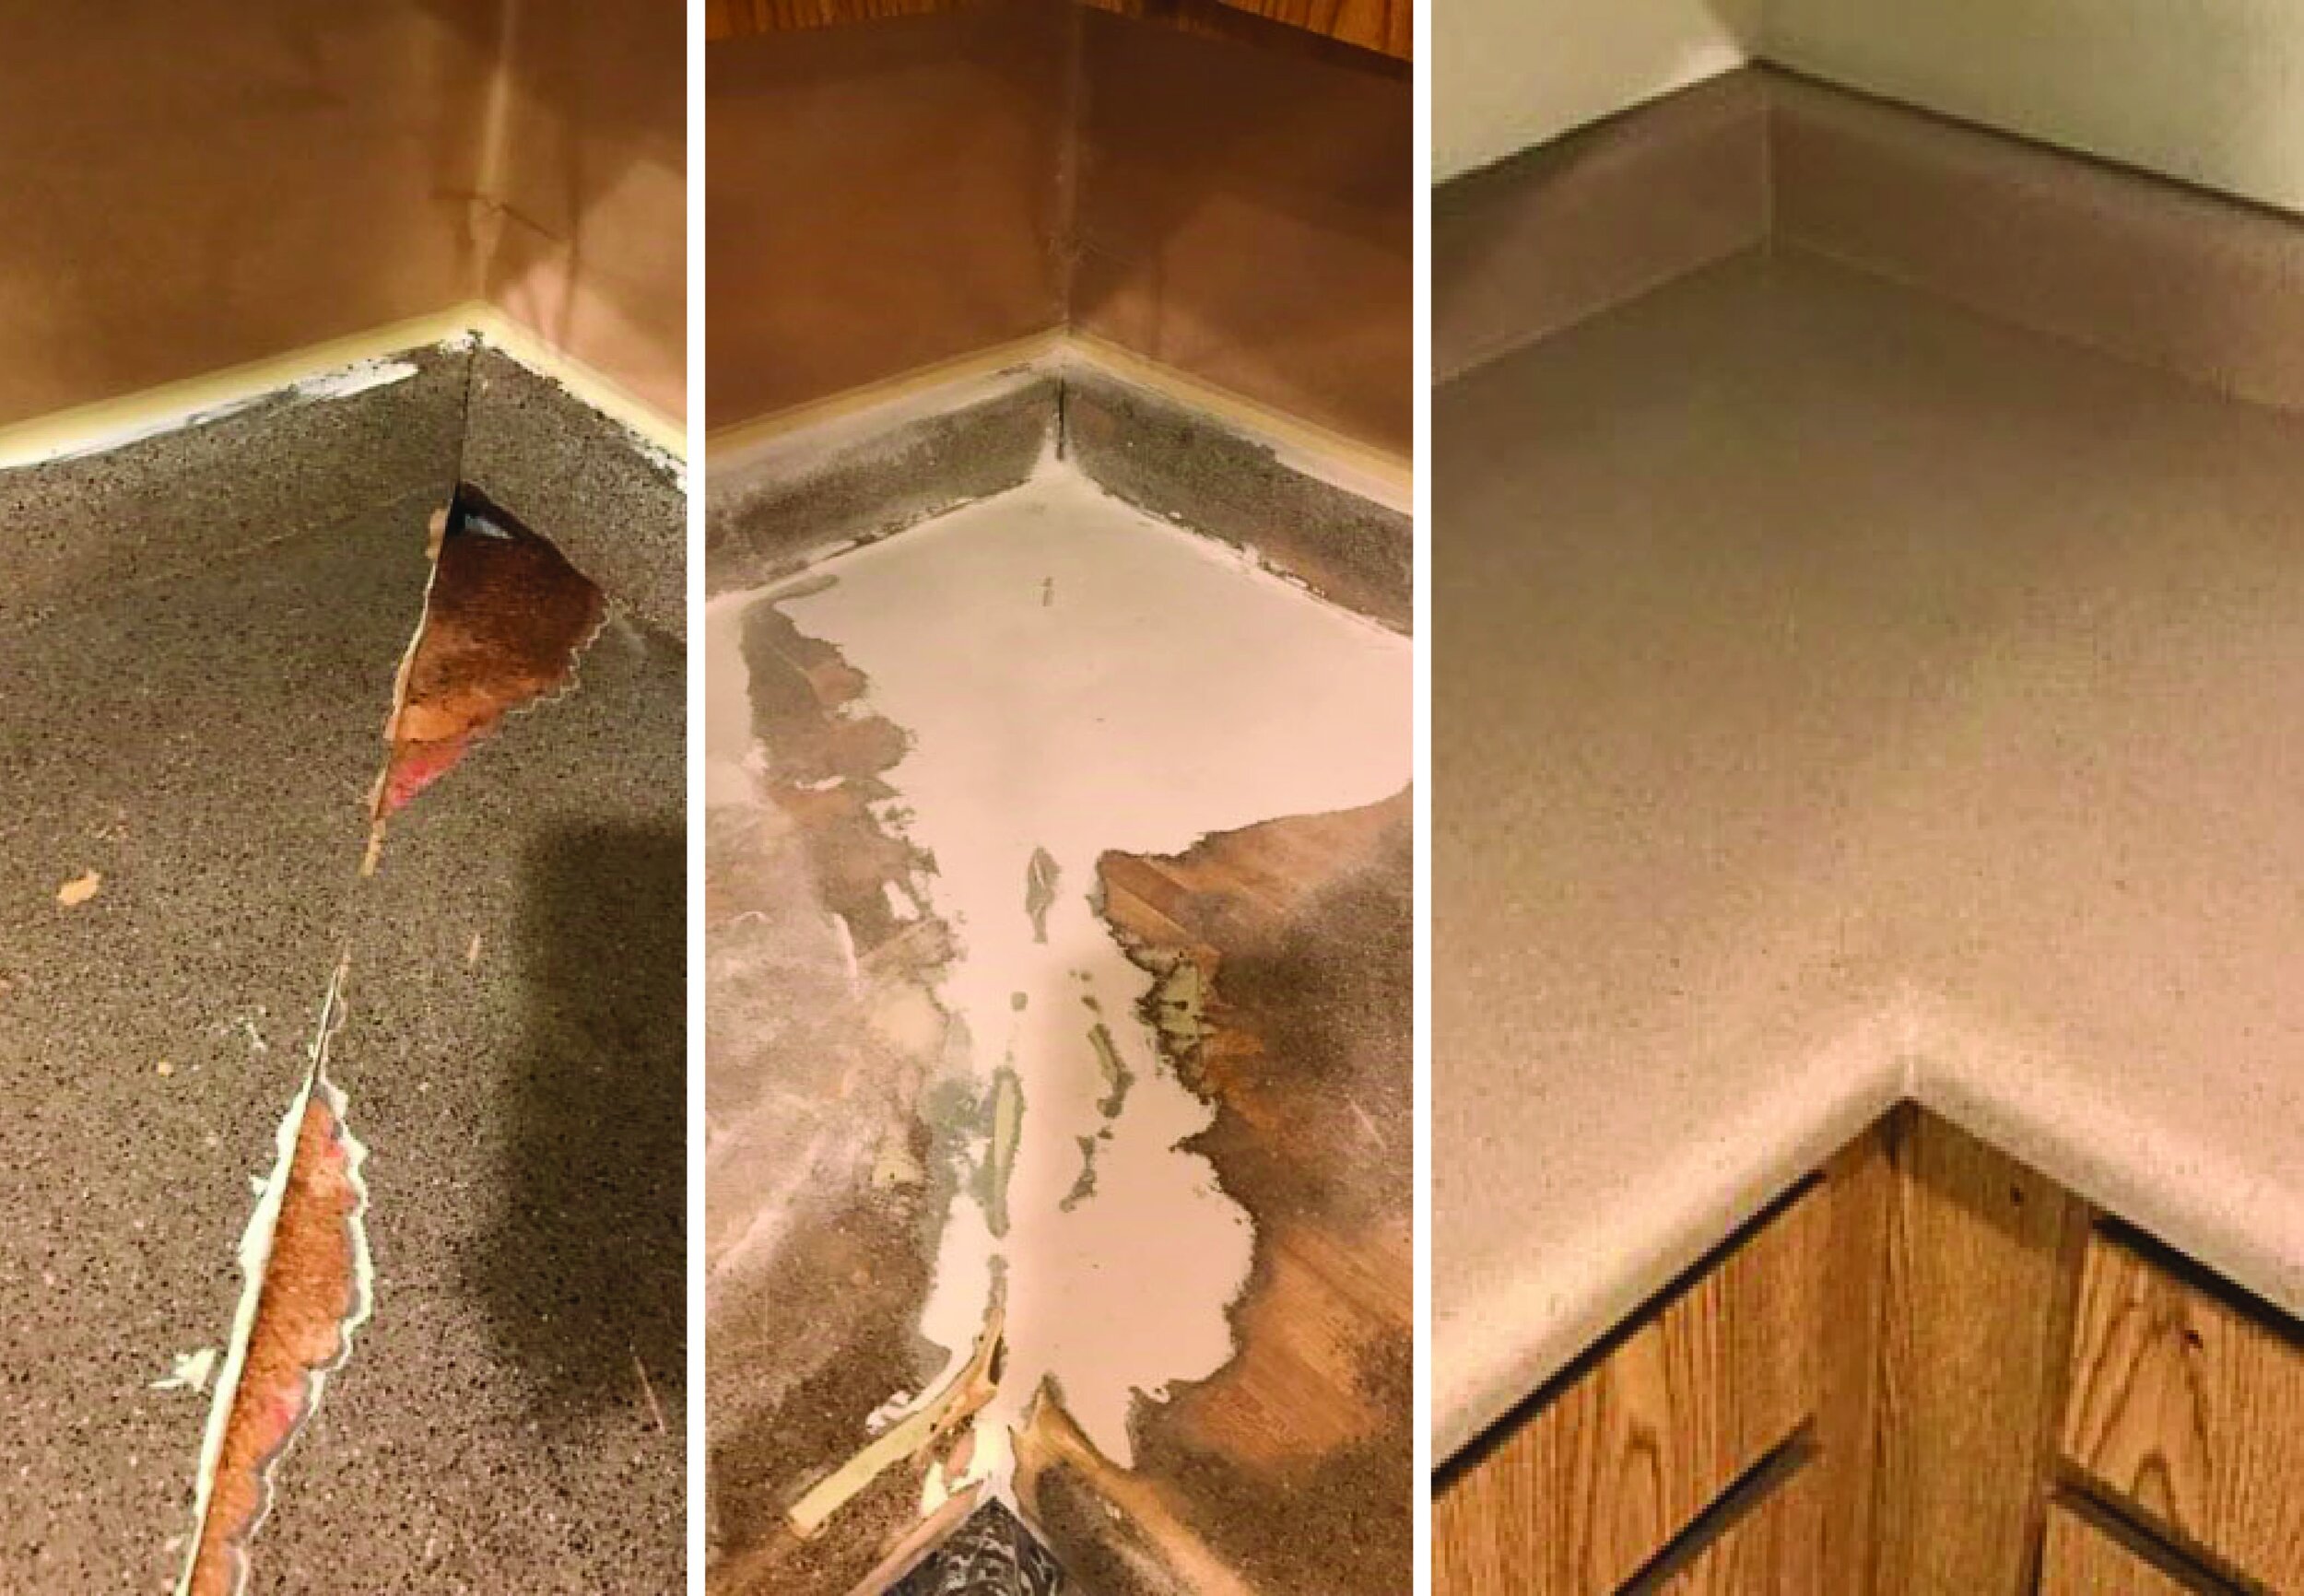   Most swollen water damaged countertops are no problem for our experienced technicians.  